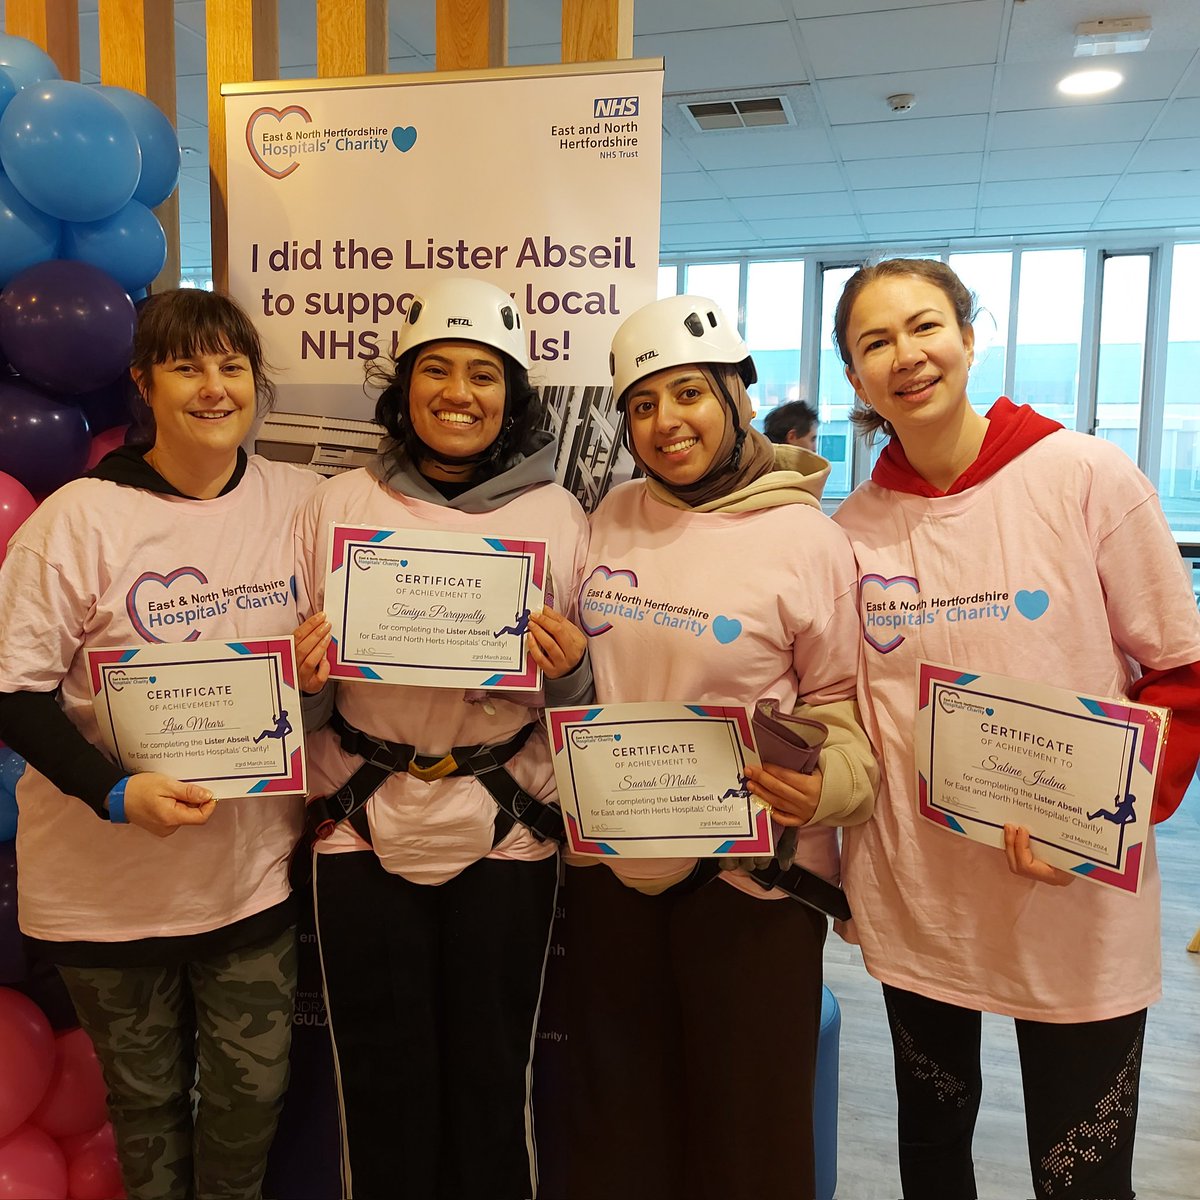 A team of our amazing NHS staff have completed the Lister Abseil! 🙌